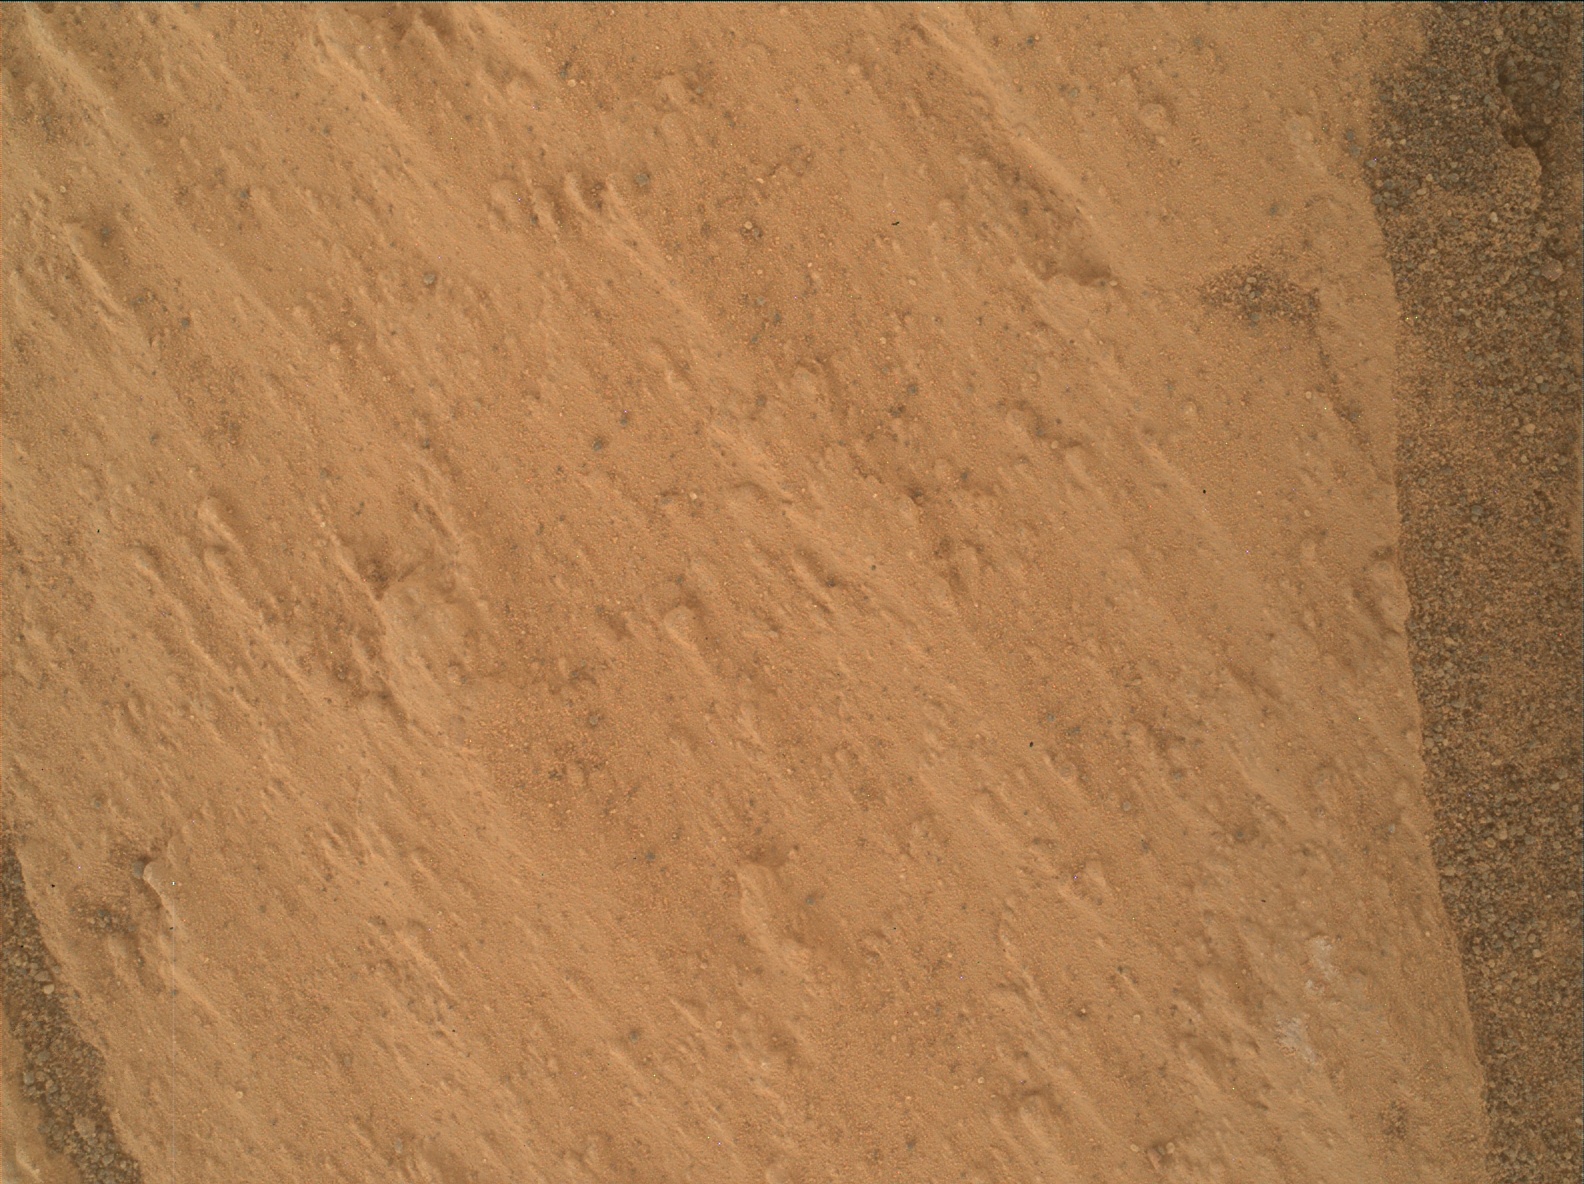 Nasa's Mars rover Curiosity acquired this image using its Mars Hand Lens Imager (MAHLI) on Sol 3329